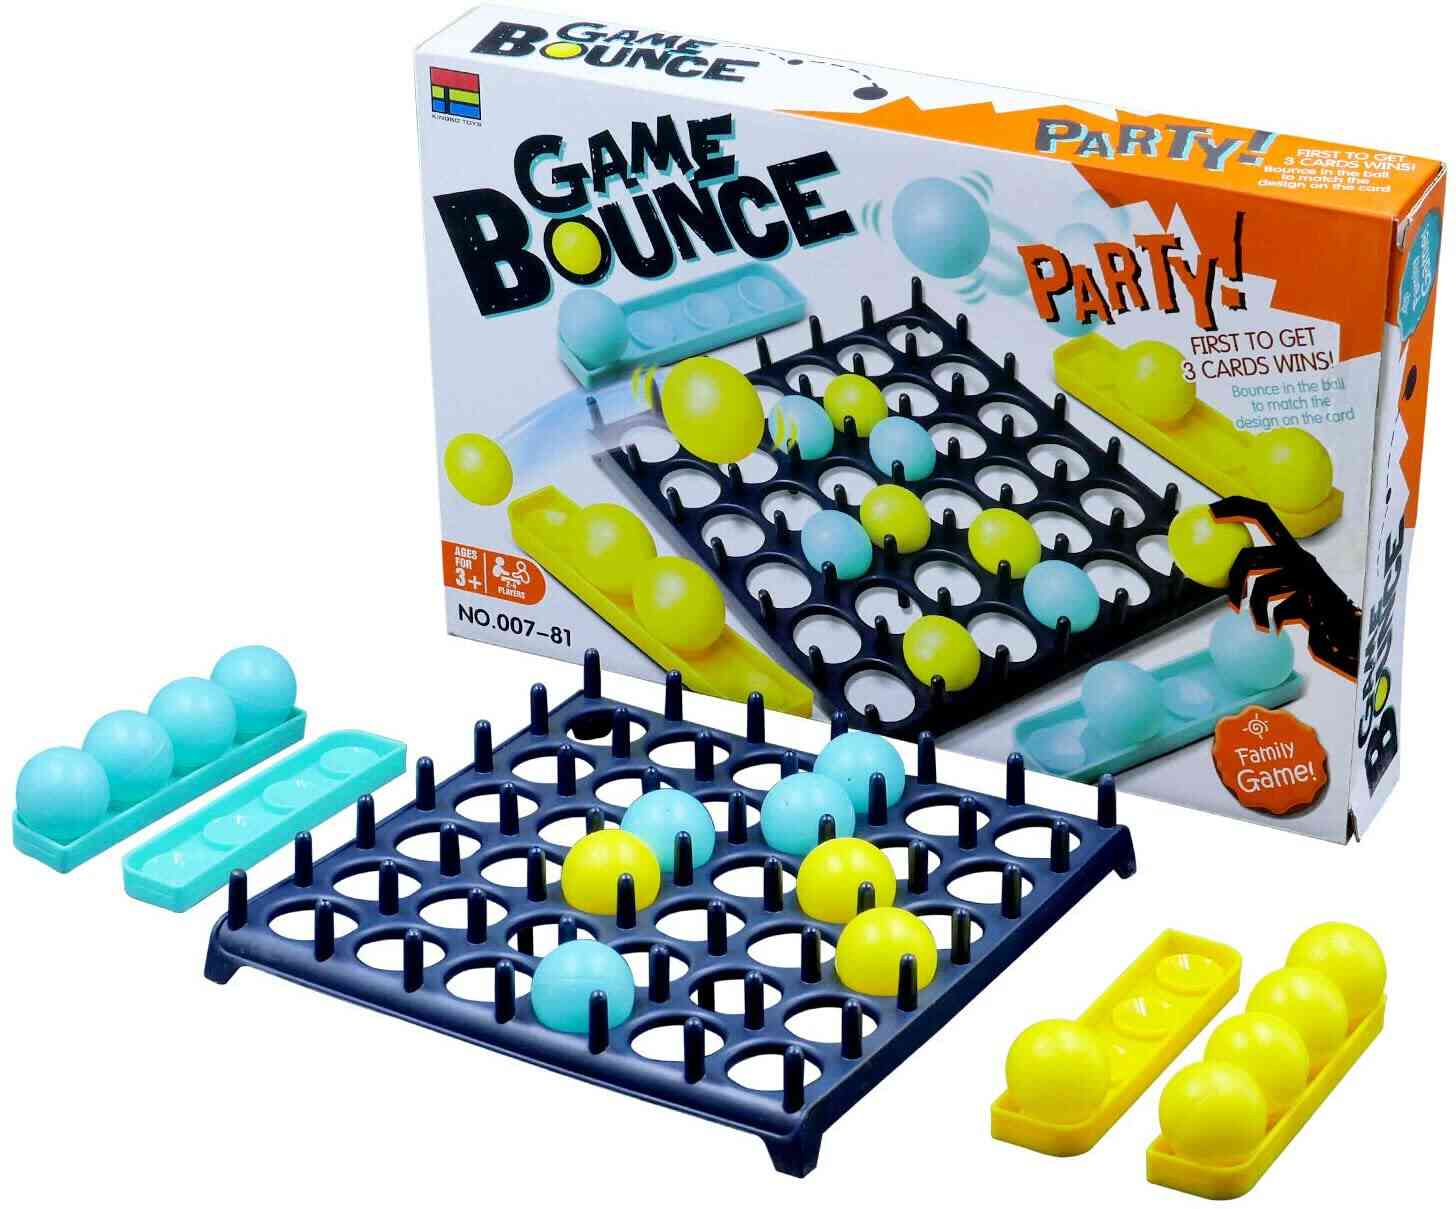 BrightRise BounceOff™ Party Game